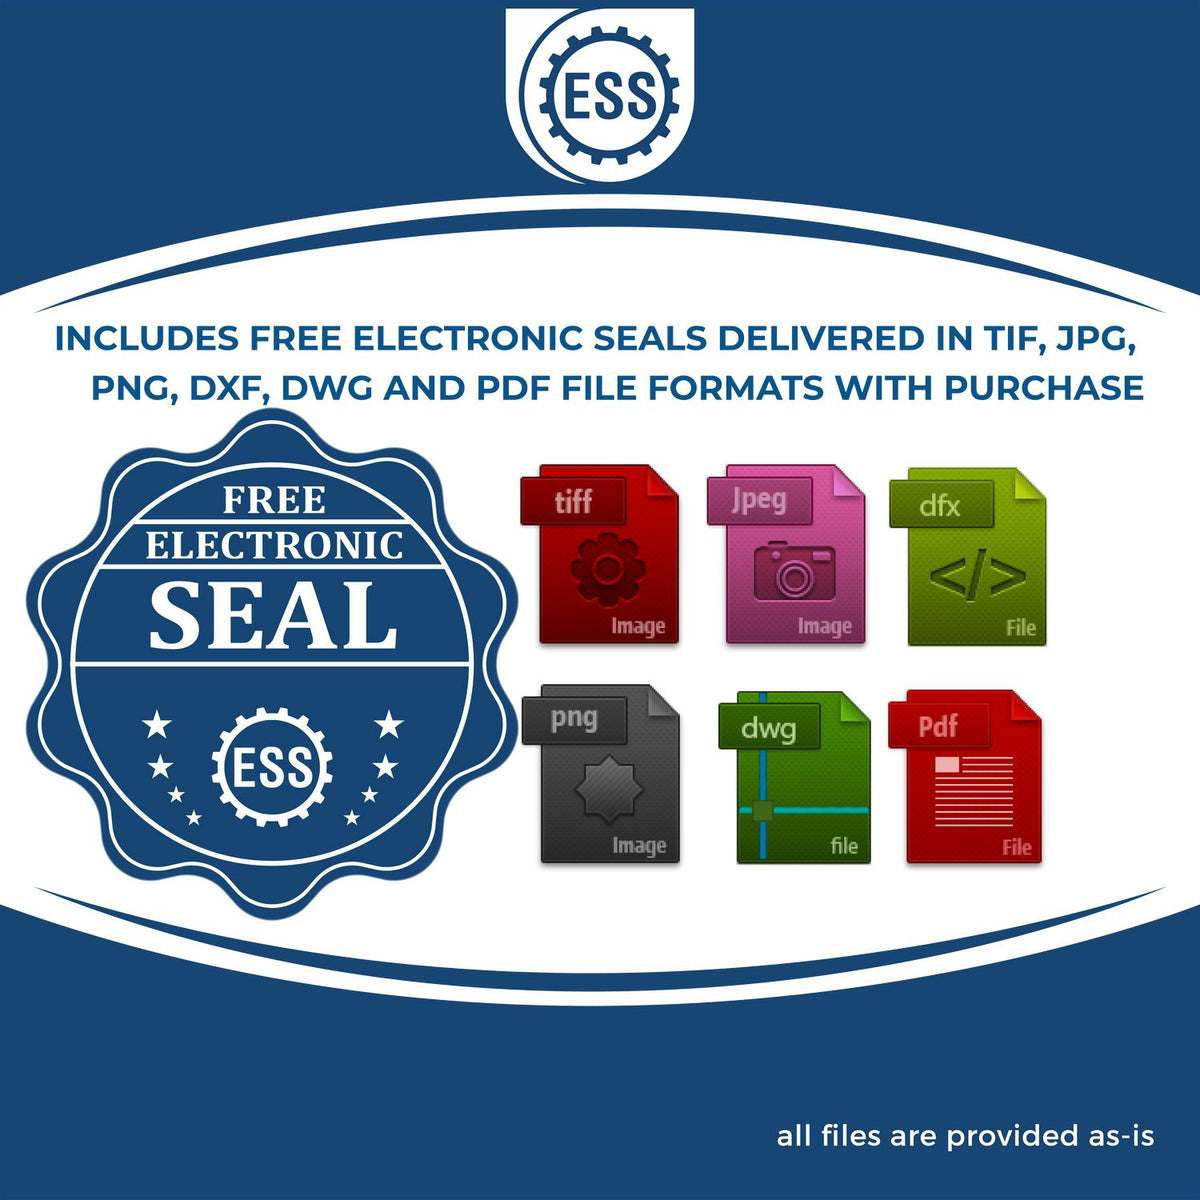 An infographic for the free electronic seal for the Gift Iowa Architect Seal illustrating the different file type icons such as DXF, DWG, TIF, JPG and PNG.